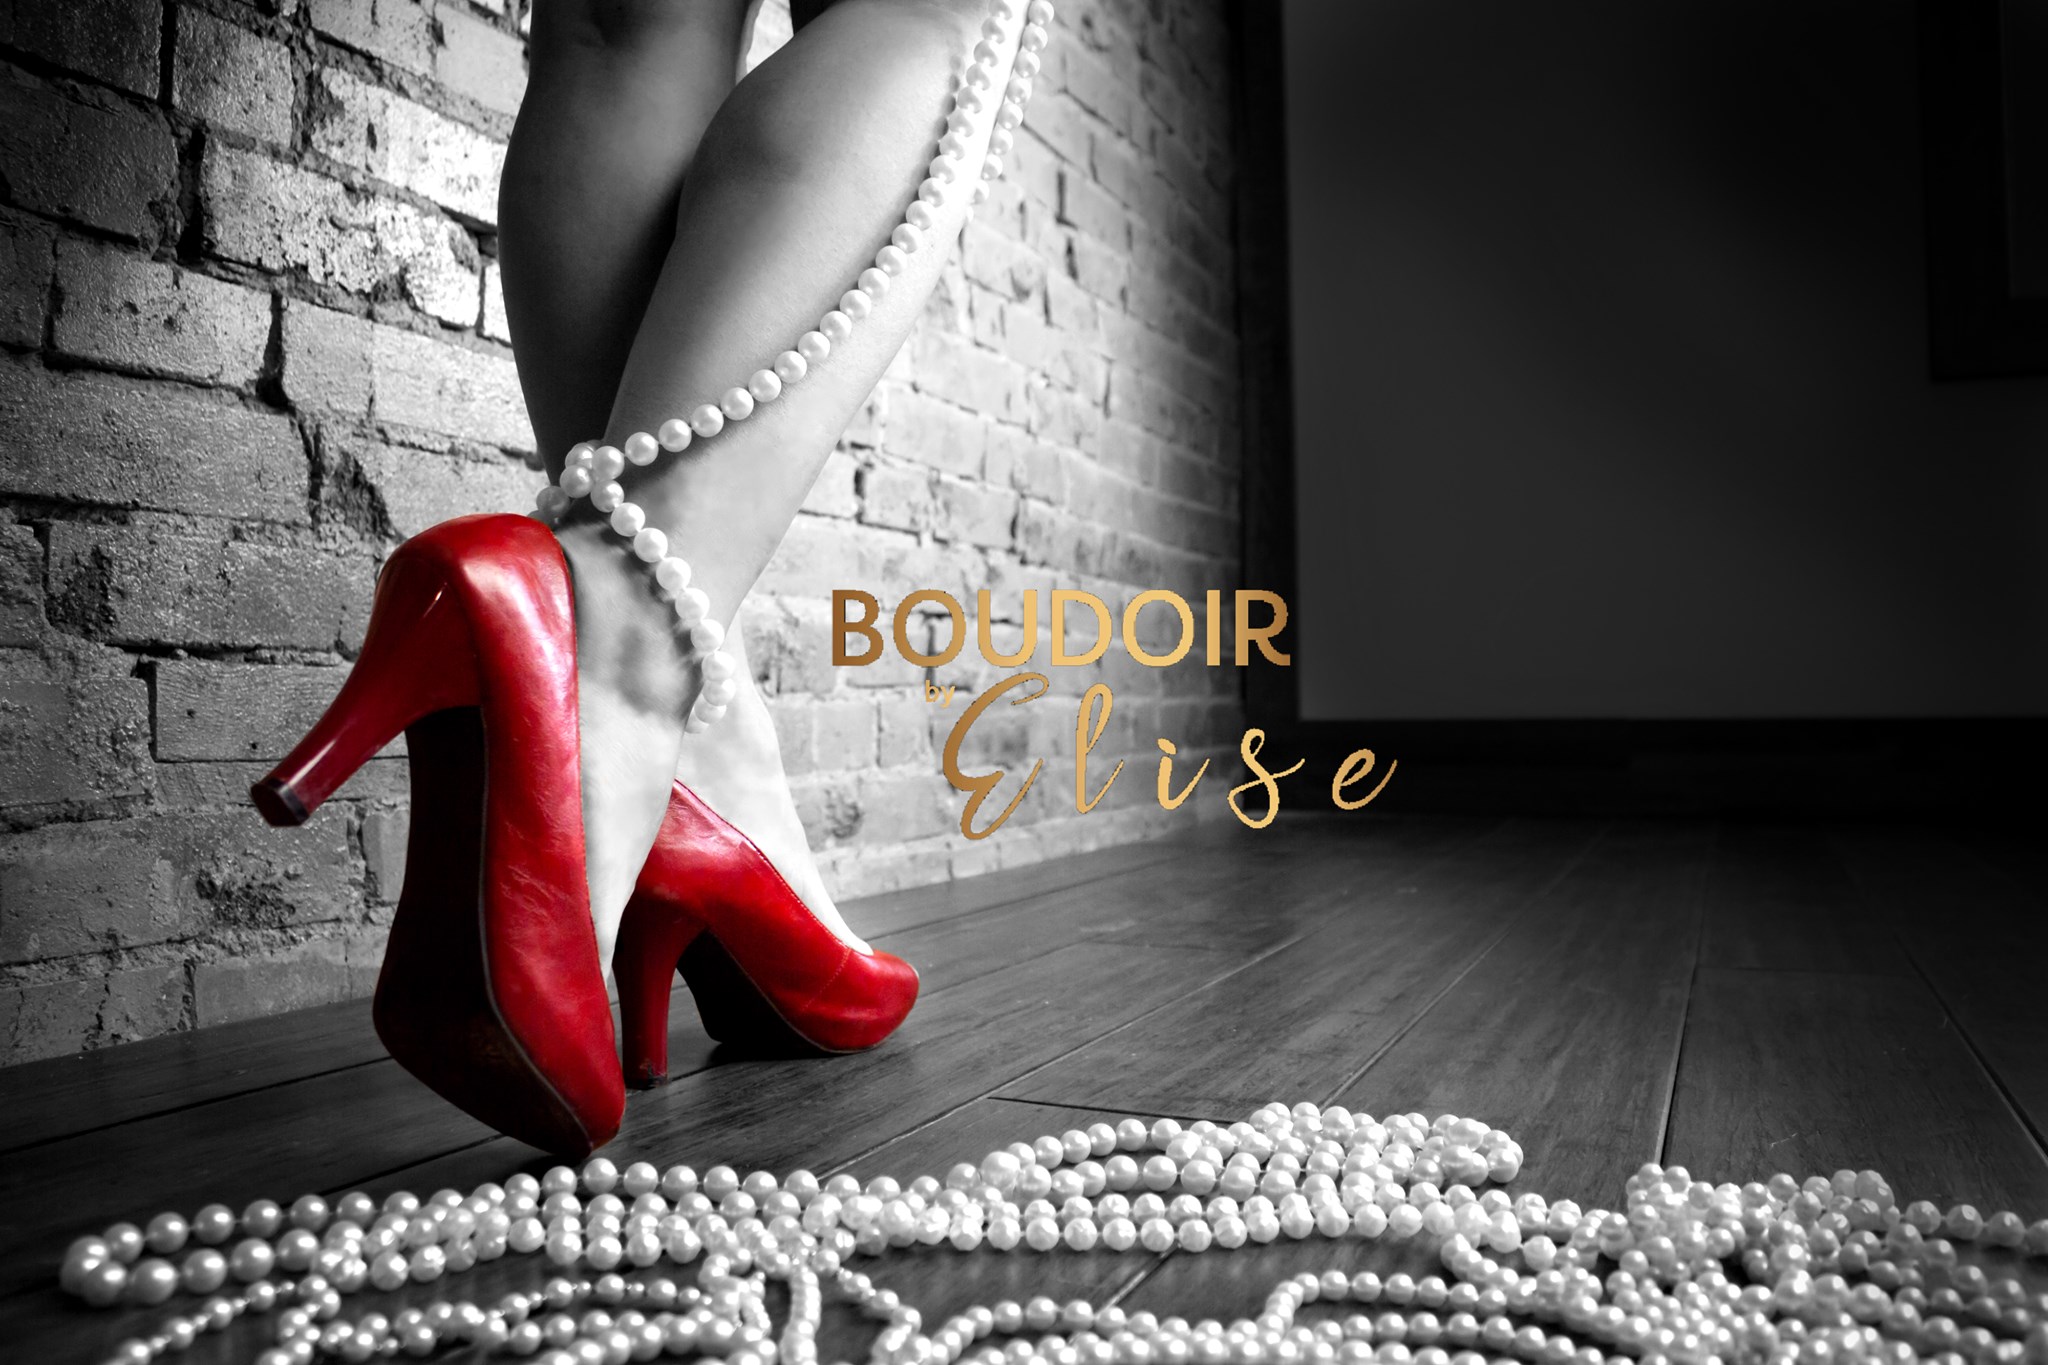 Business logo of Boudoir By Elise